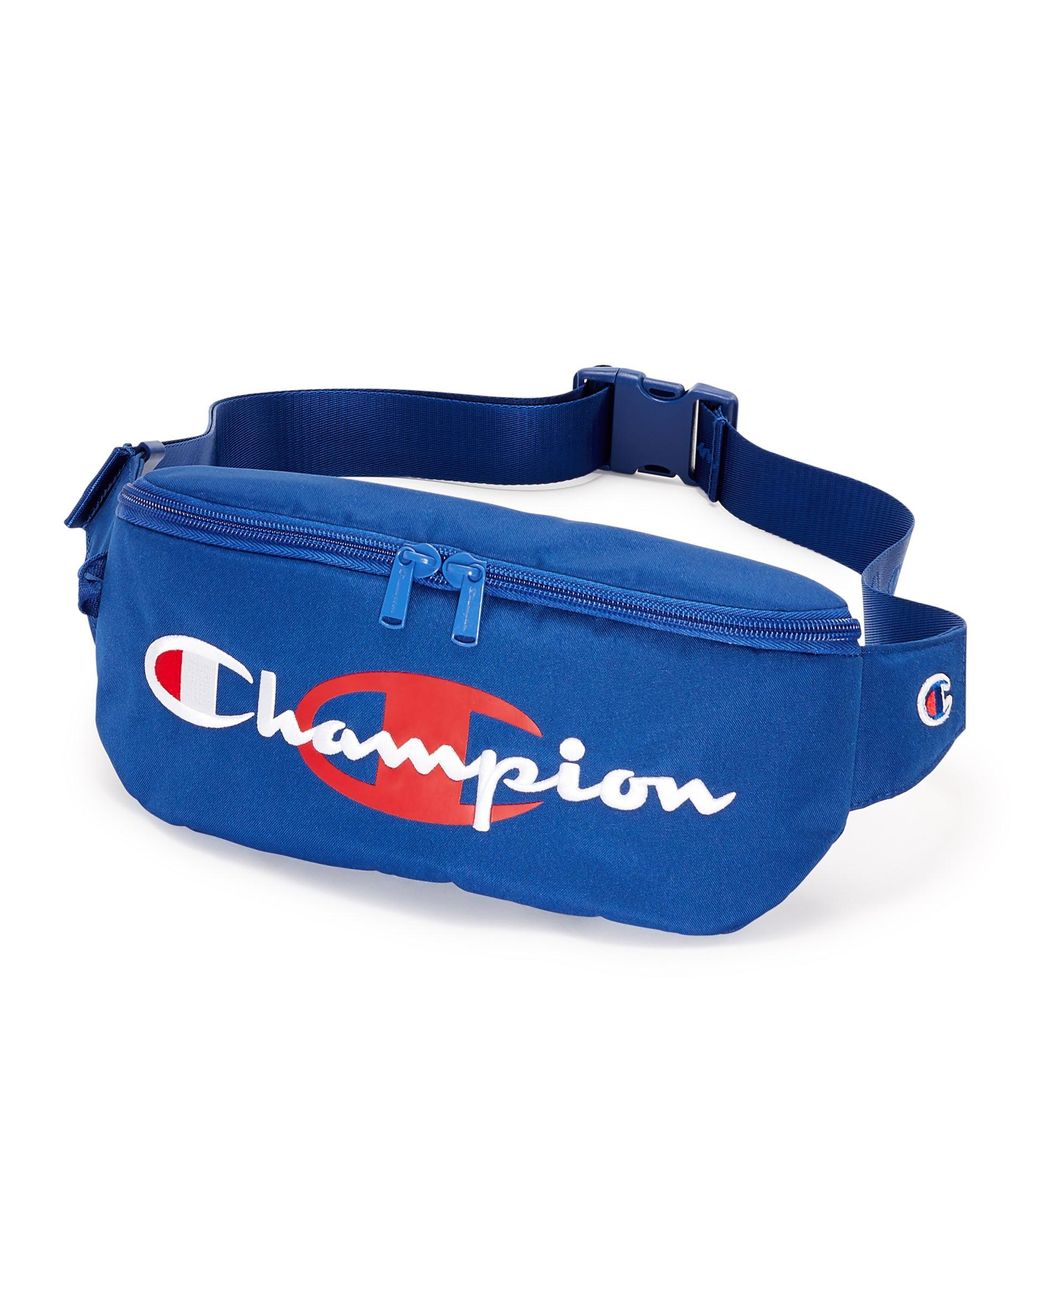 Champion Canvas Life Supercize Graphic Waist Pack in Blue - Lyst